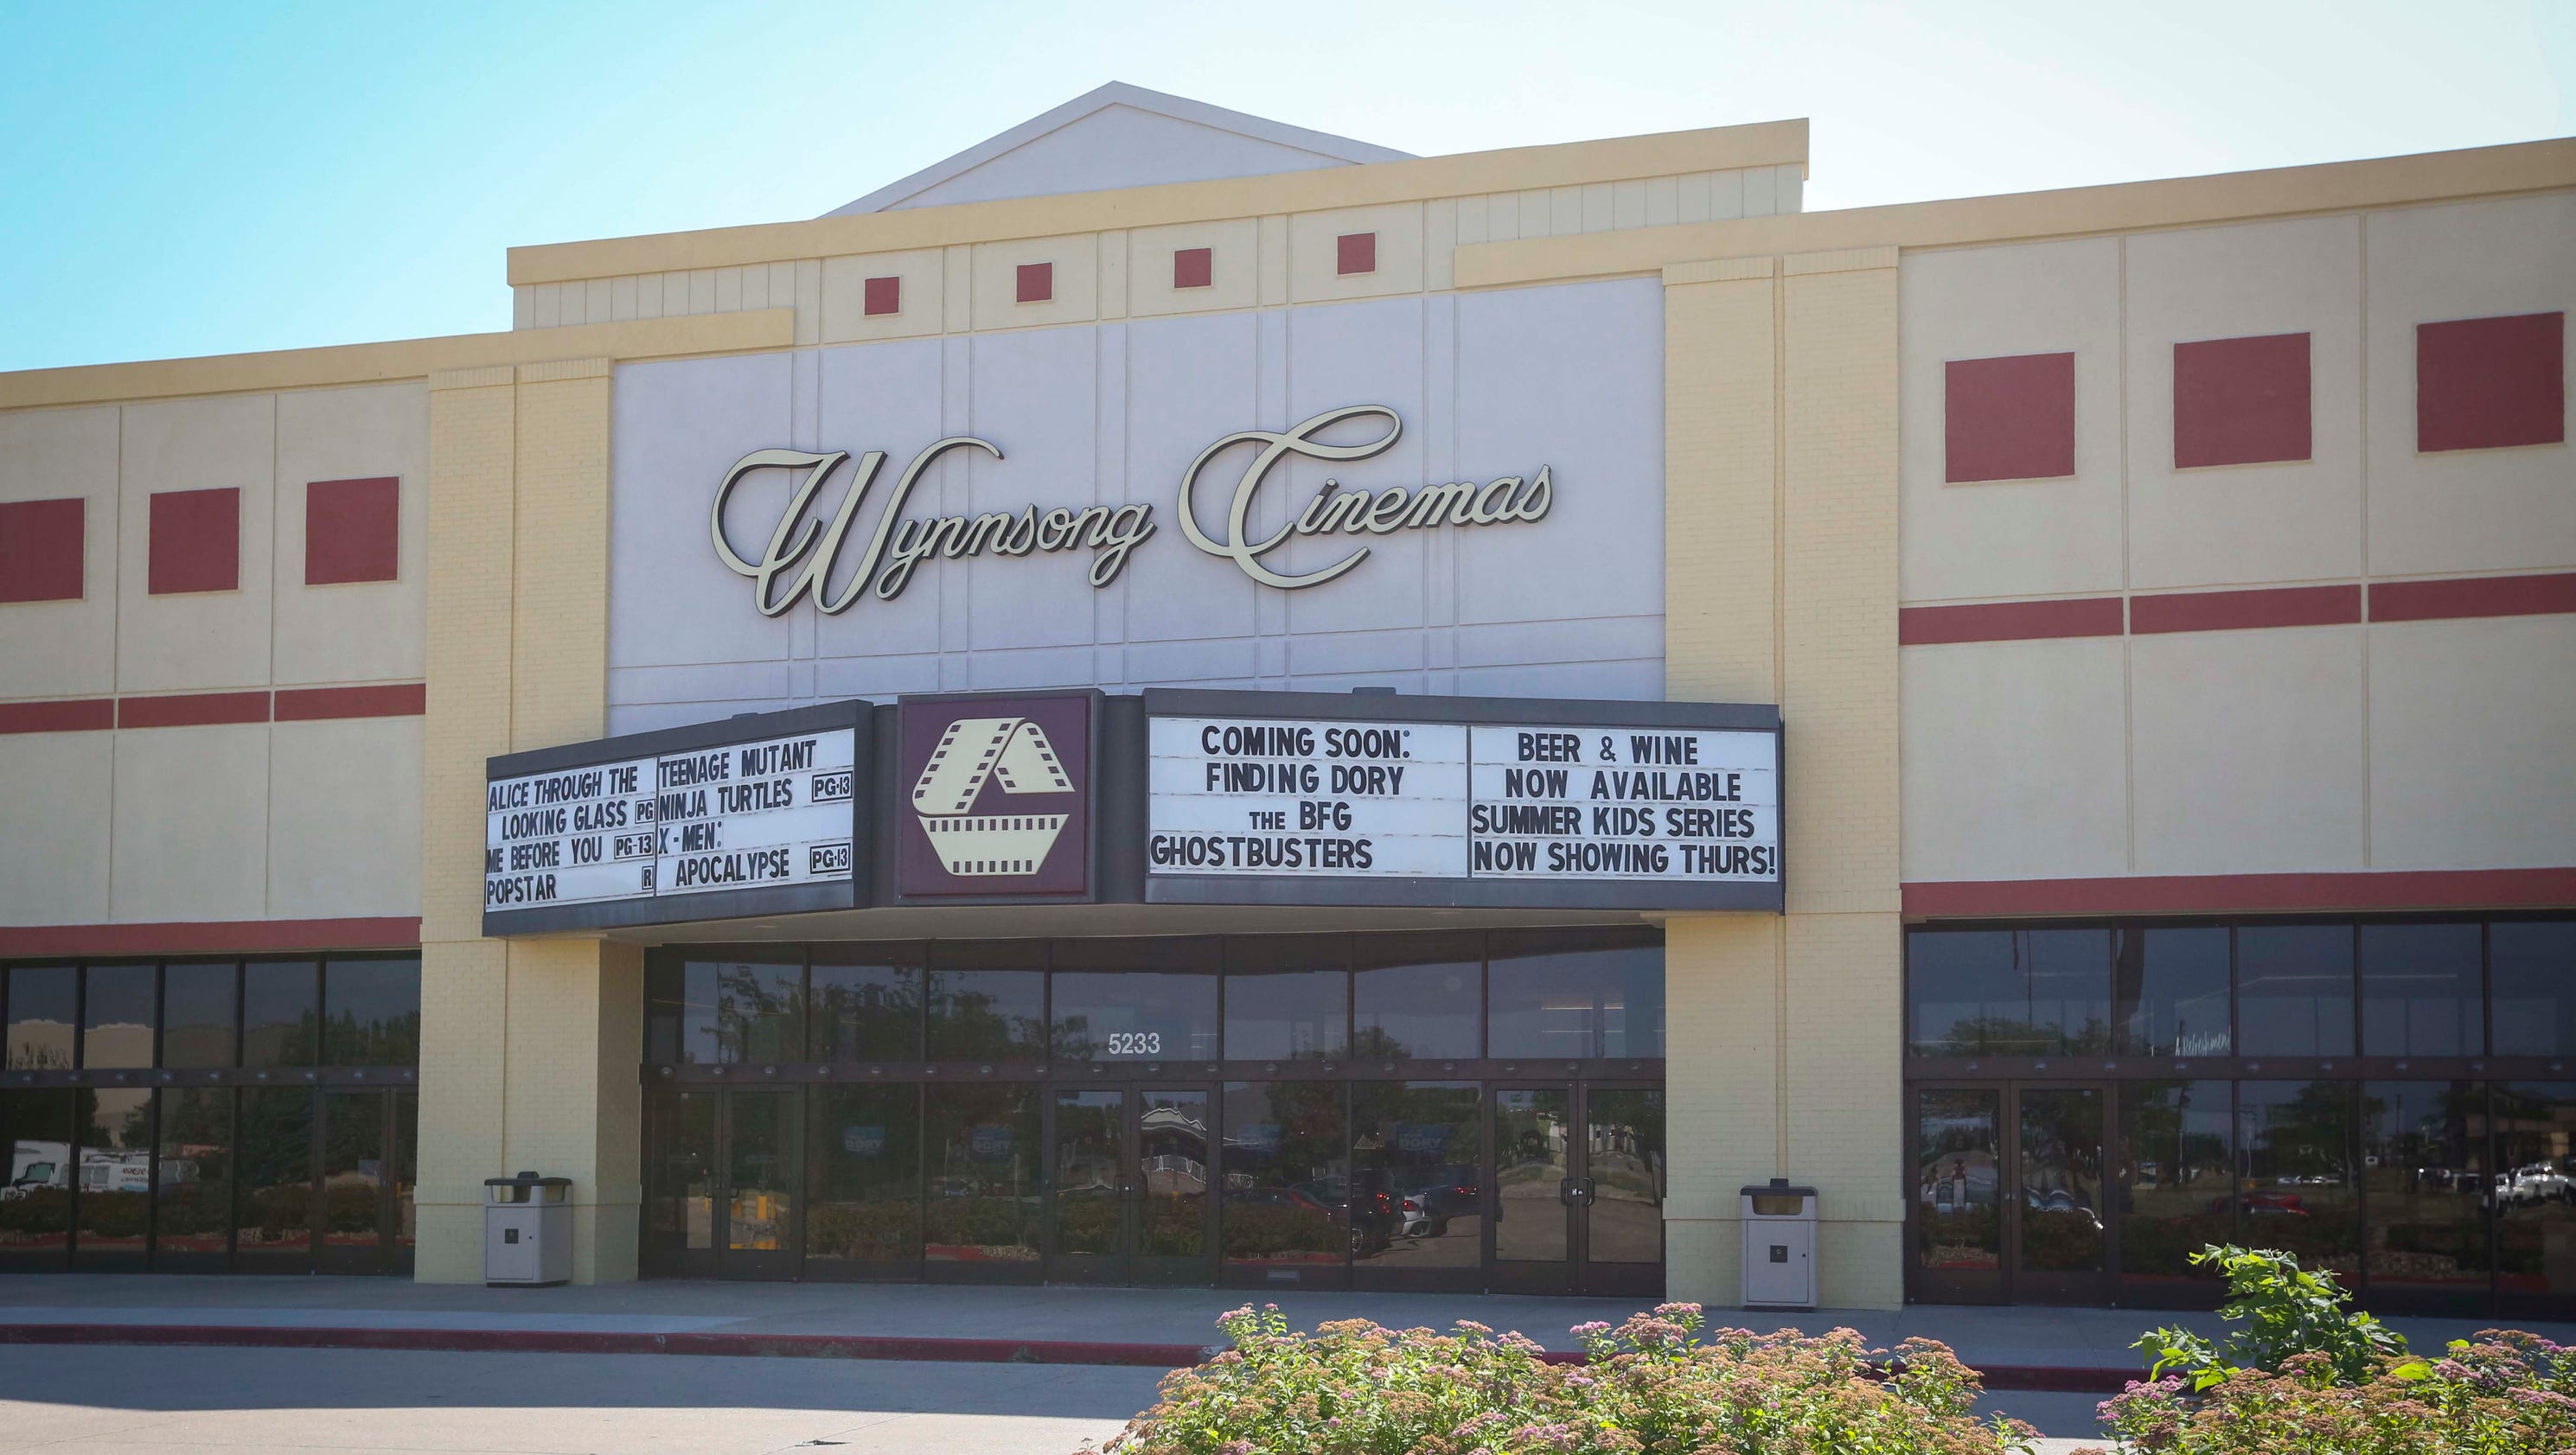 Local movie theaters